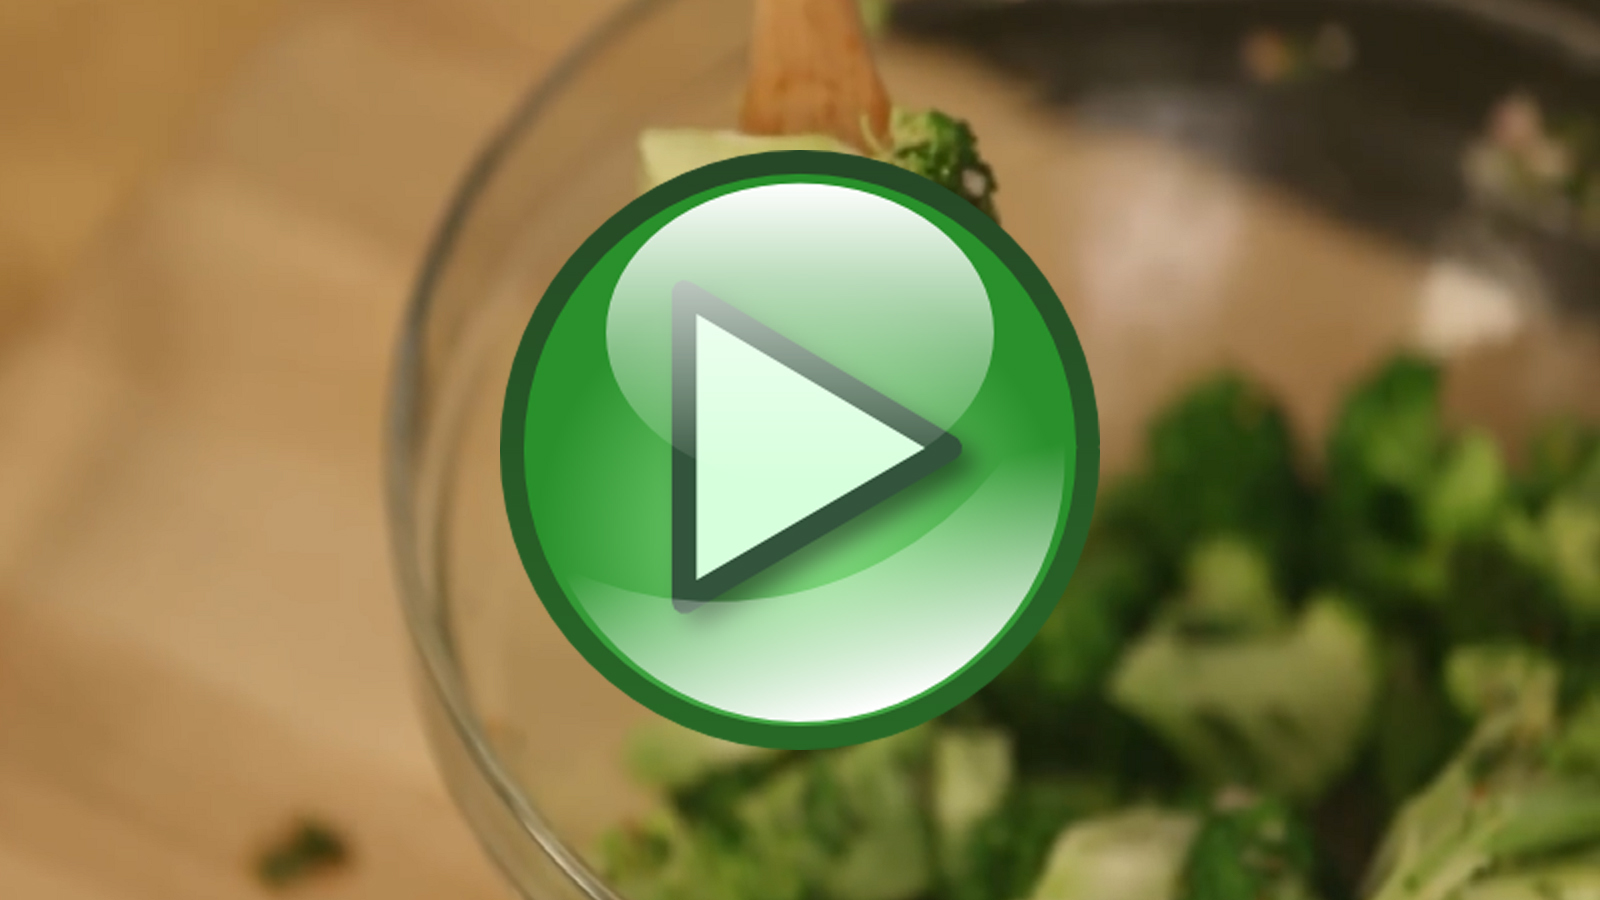 Healthy Cooking Videos: How to Cook Vegetables